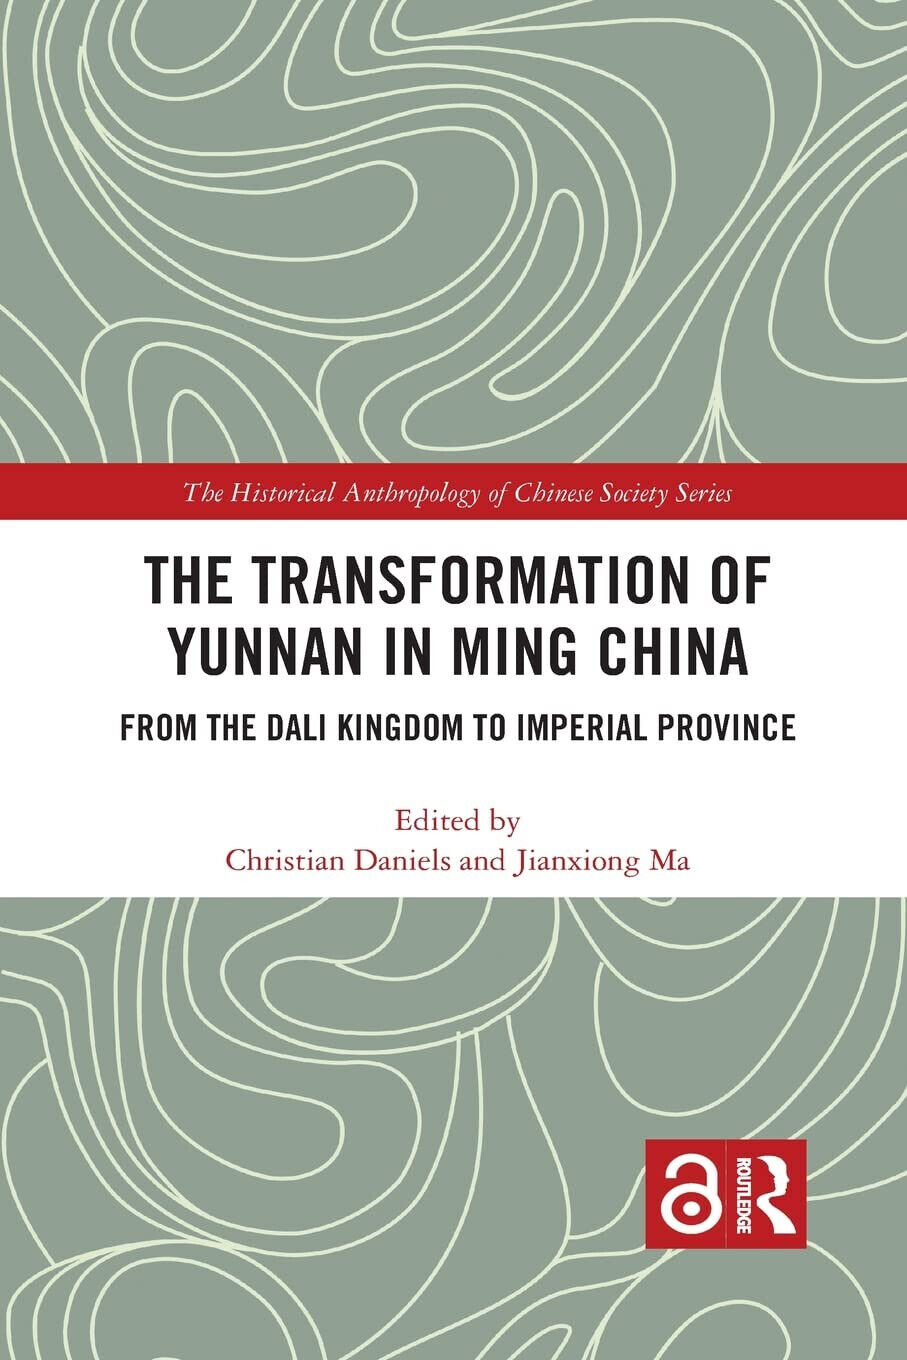 The Transformation Of Yunnan In Ming China - Christian Daniels - Routledge, 2021